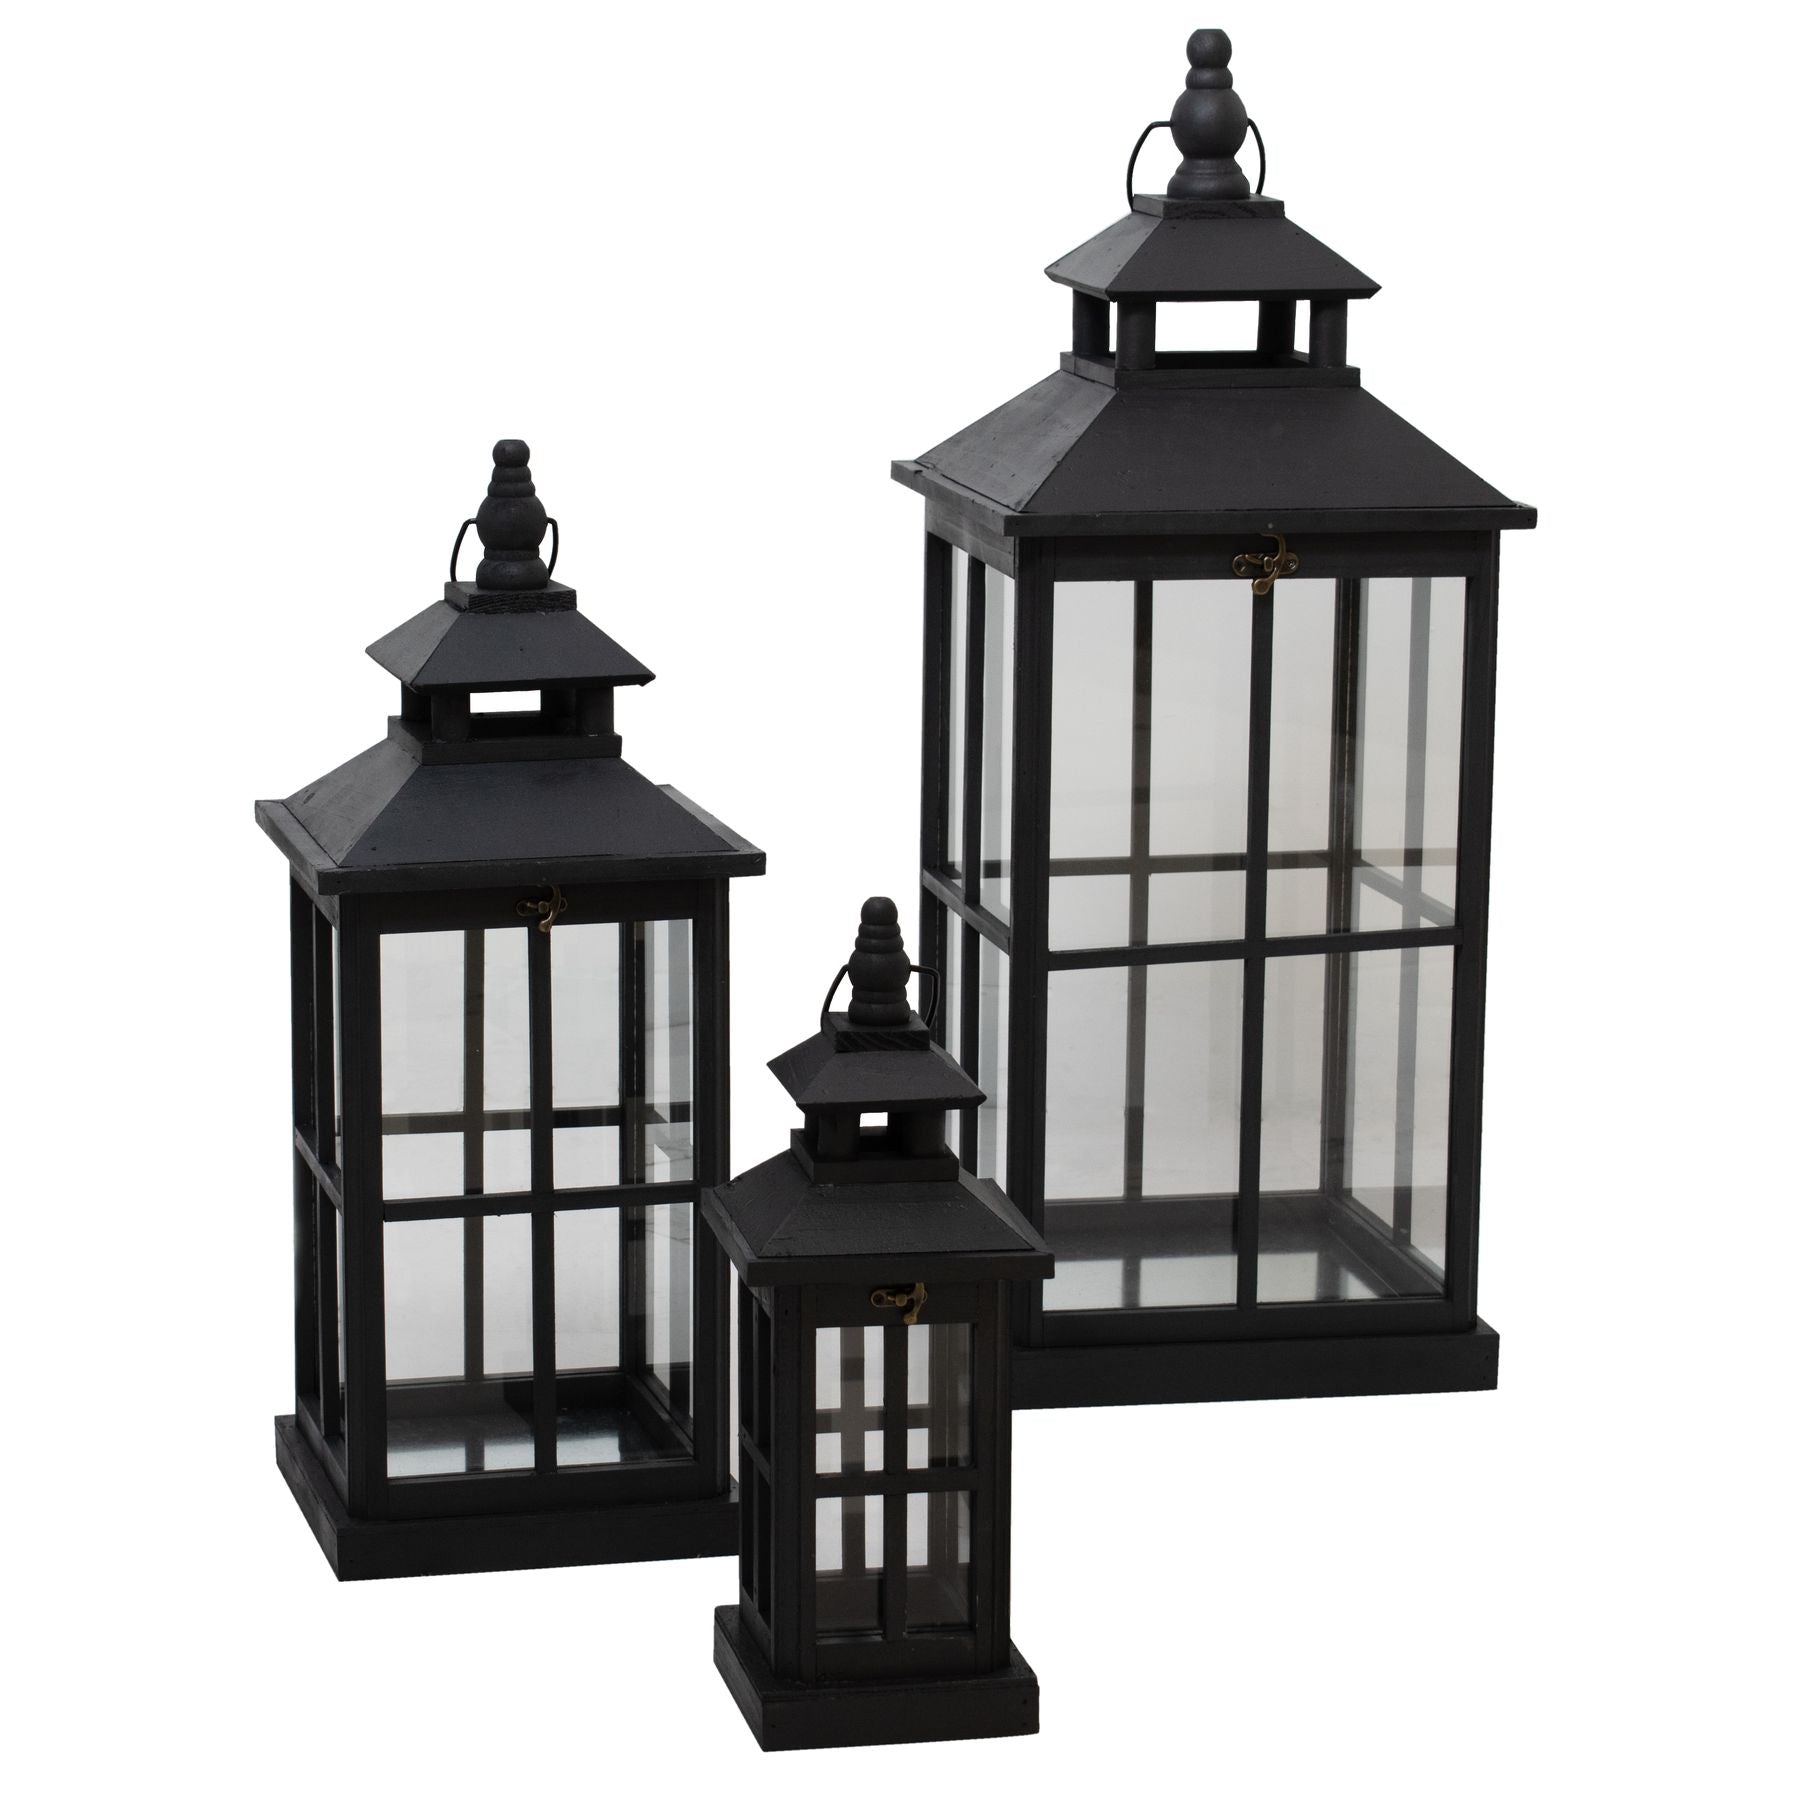 View Set Of 3 Black Window Style Lanterns With Open Top information